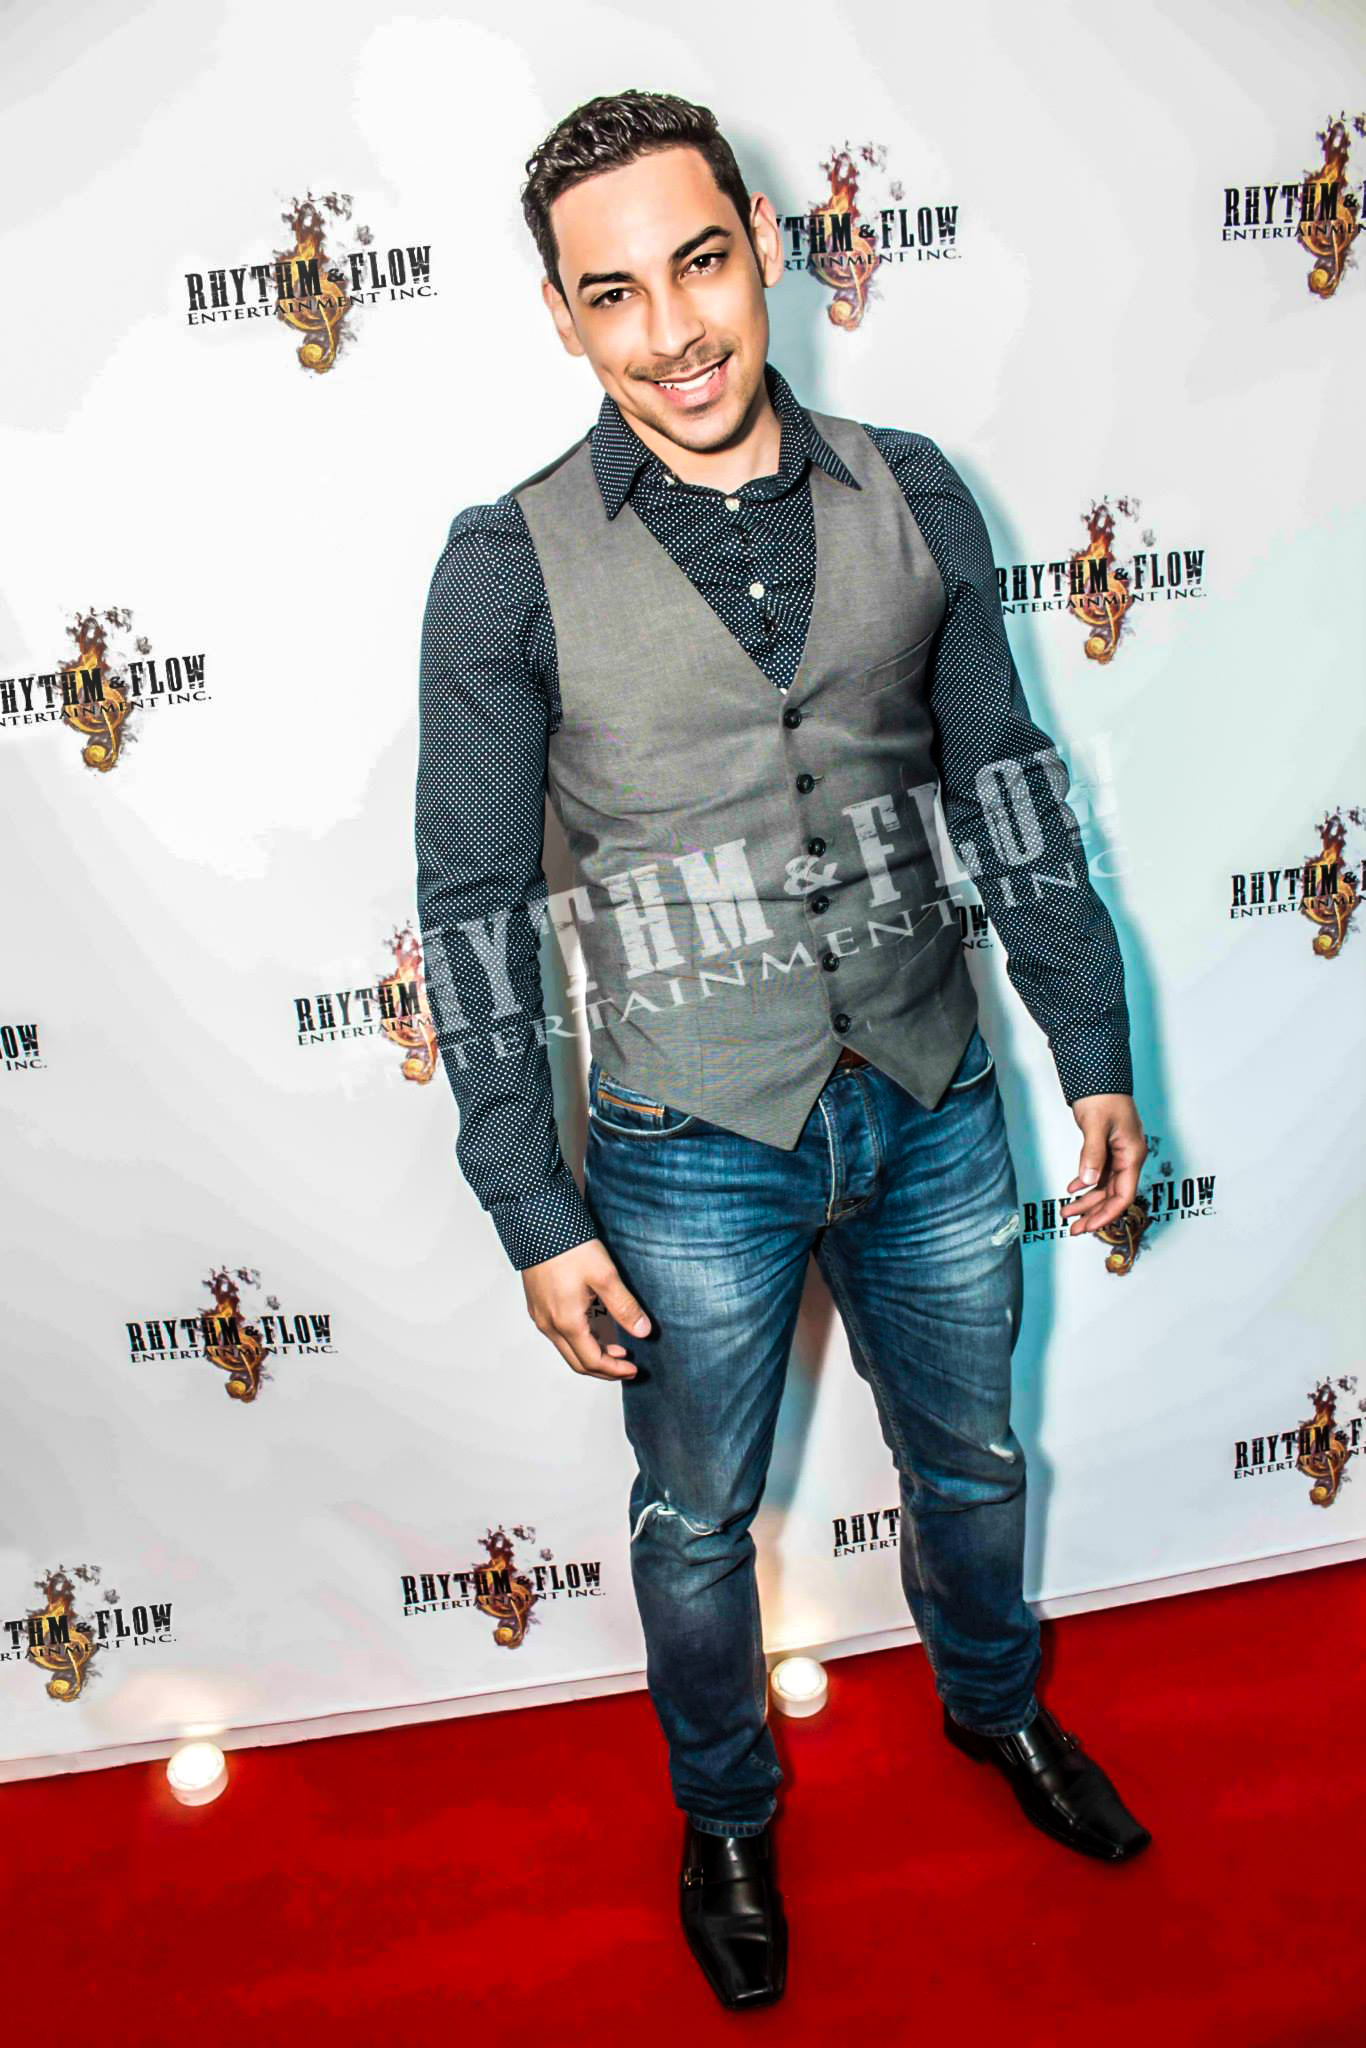 Rhythm and Flow Entertainment Website Red Carpet Launch Party